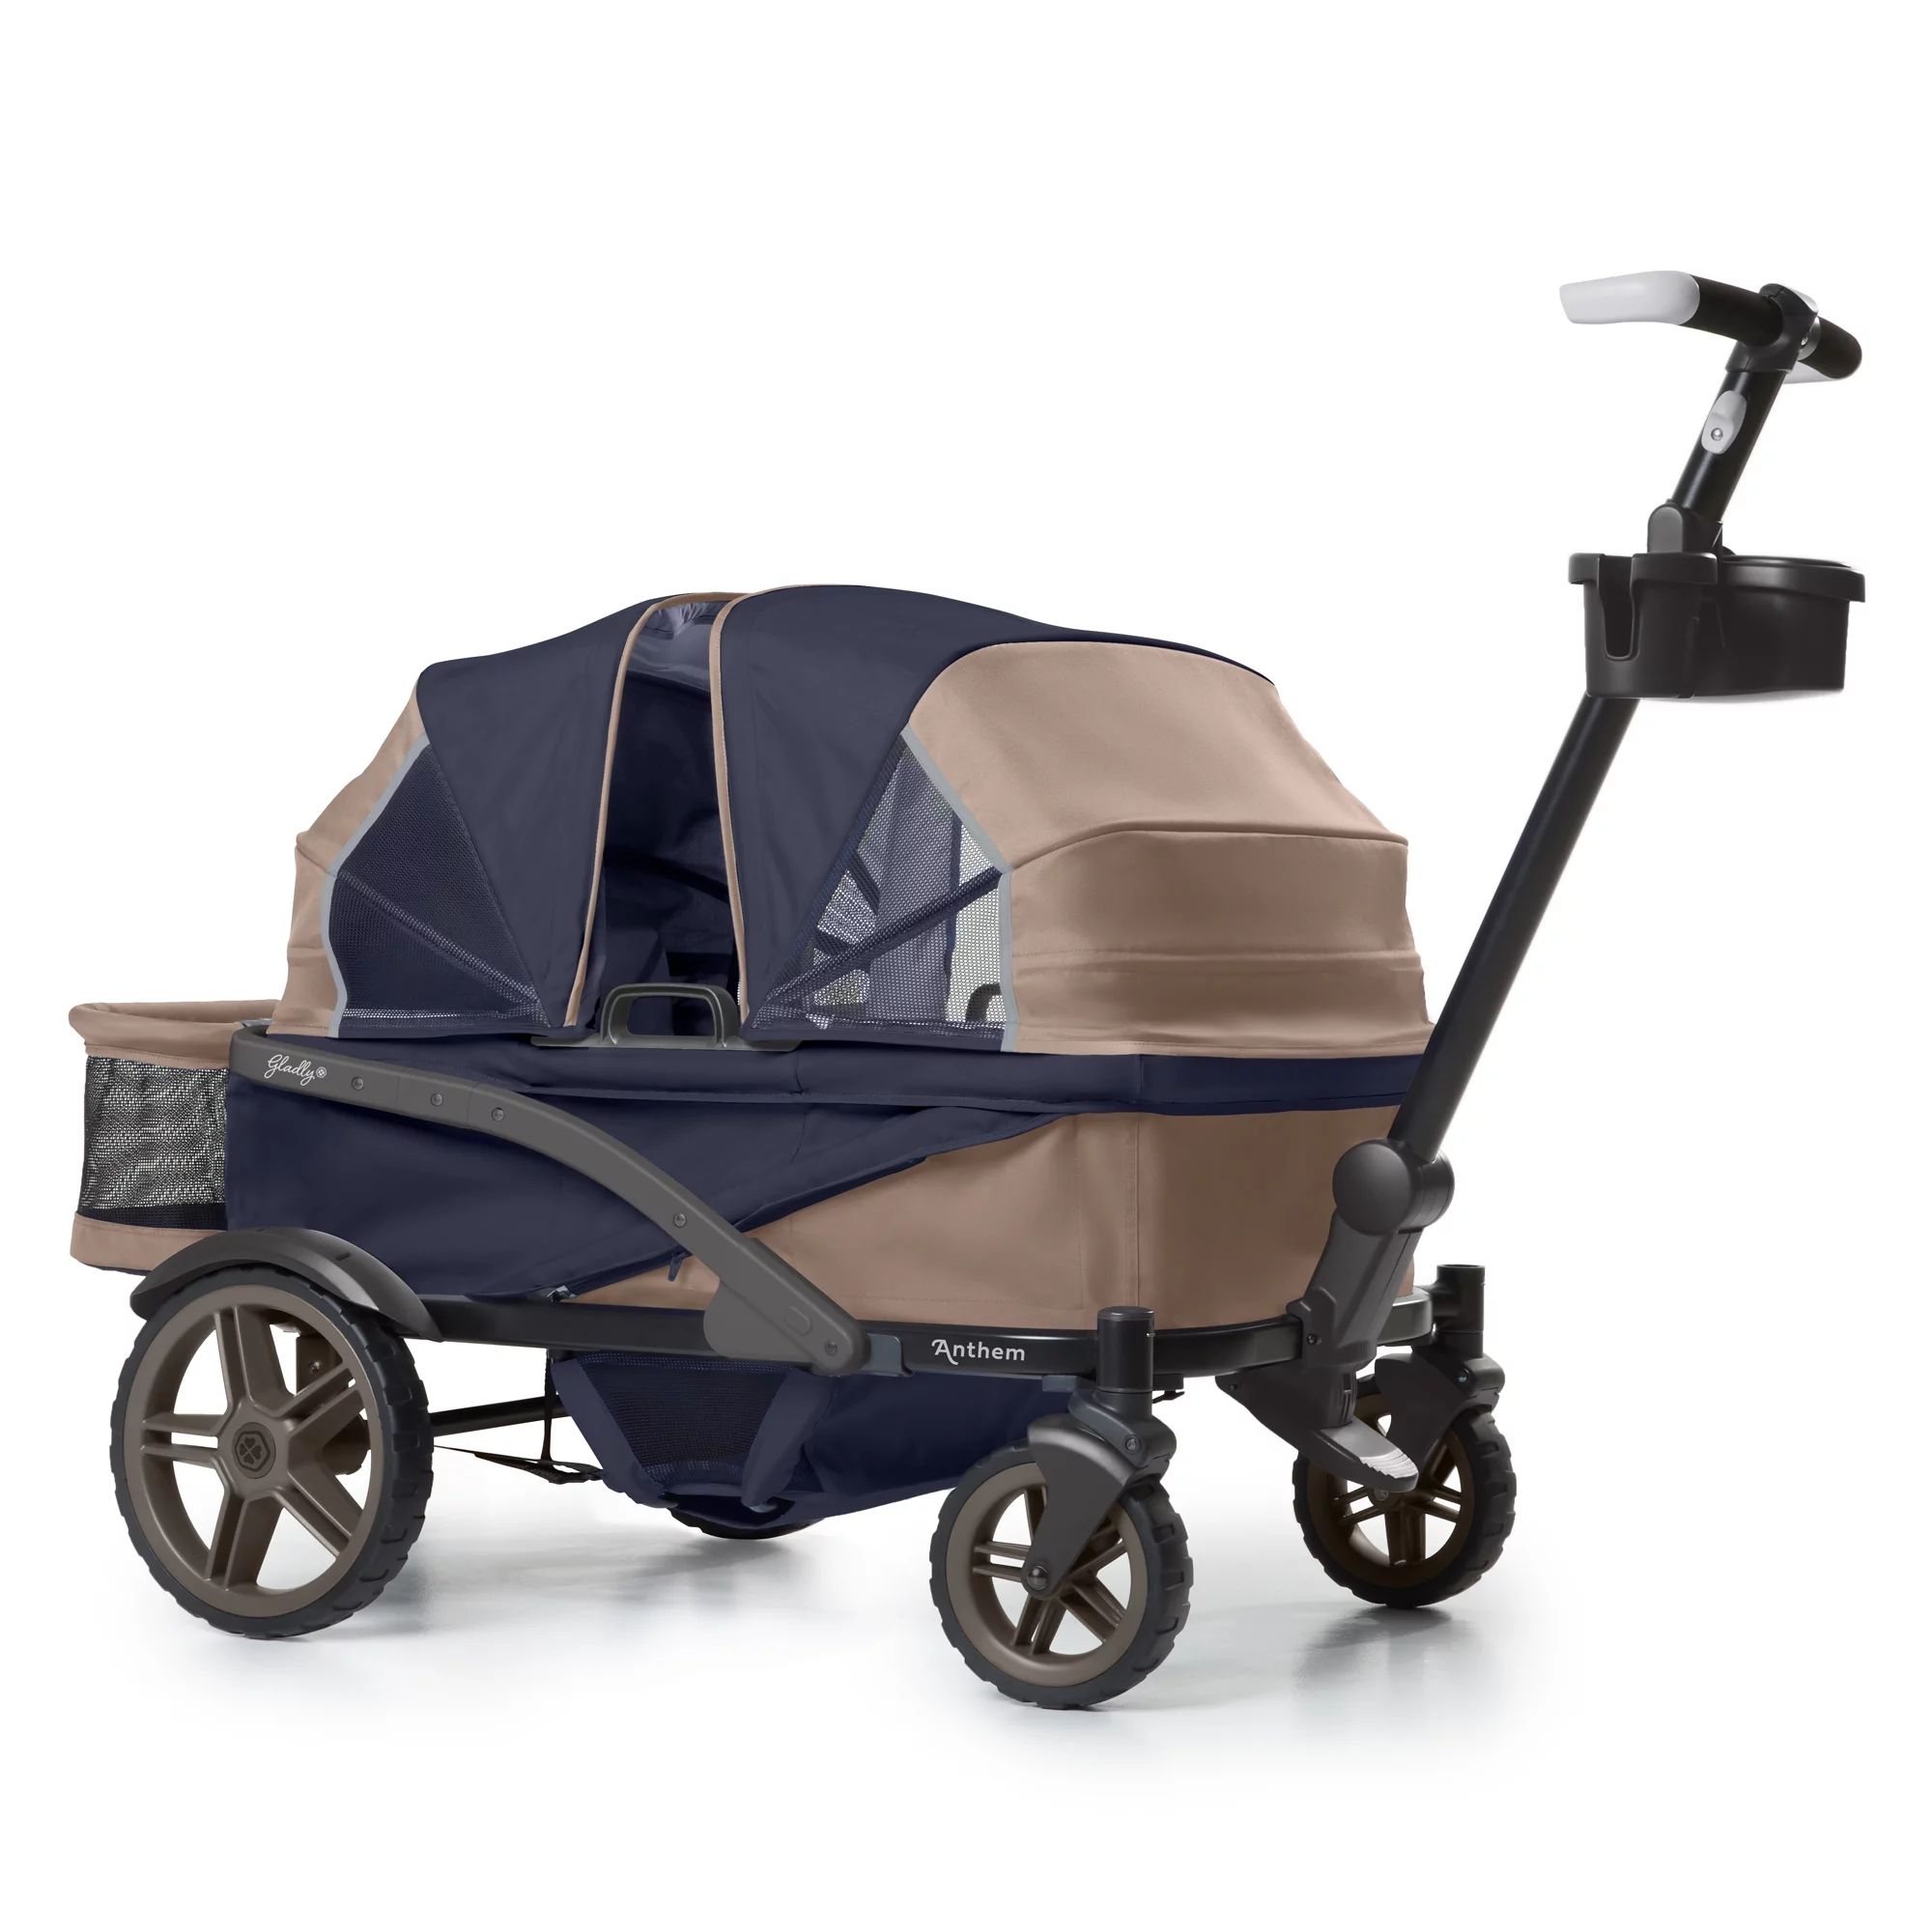 Gladly Family Anthem4 All-Terrain 4-Seater Wagon Stroller, Rugged Wheels, Canopy, Foldable, Sand ... | Walmart (US)